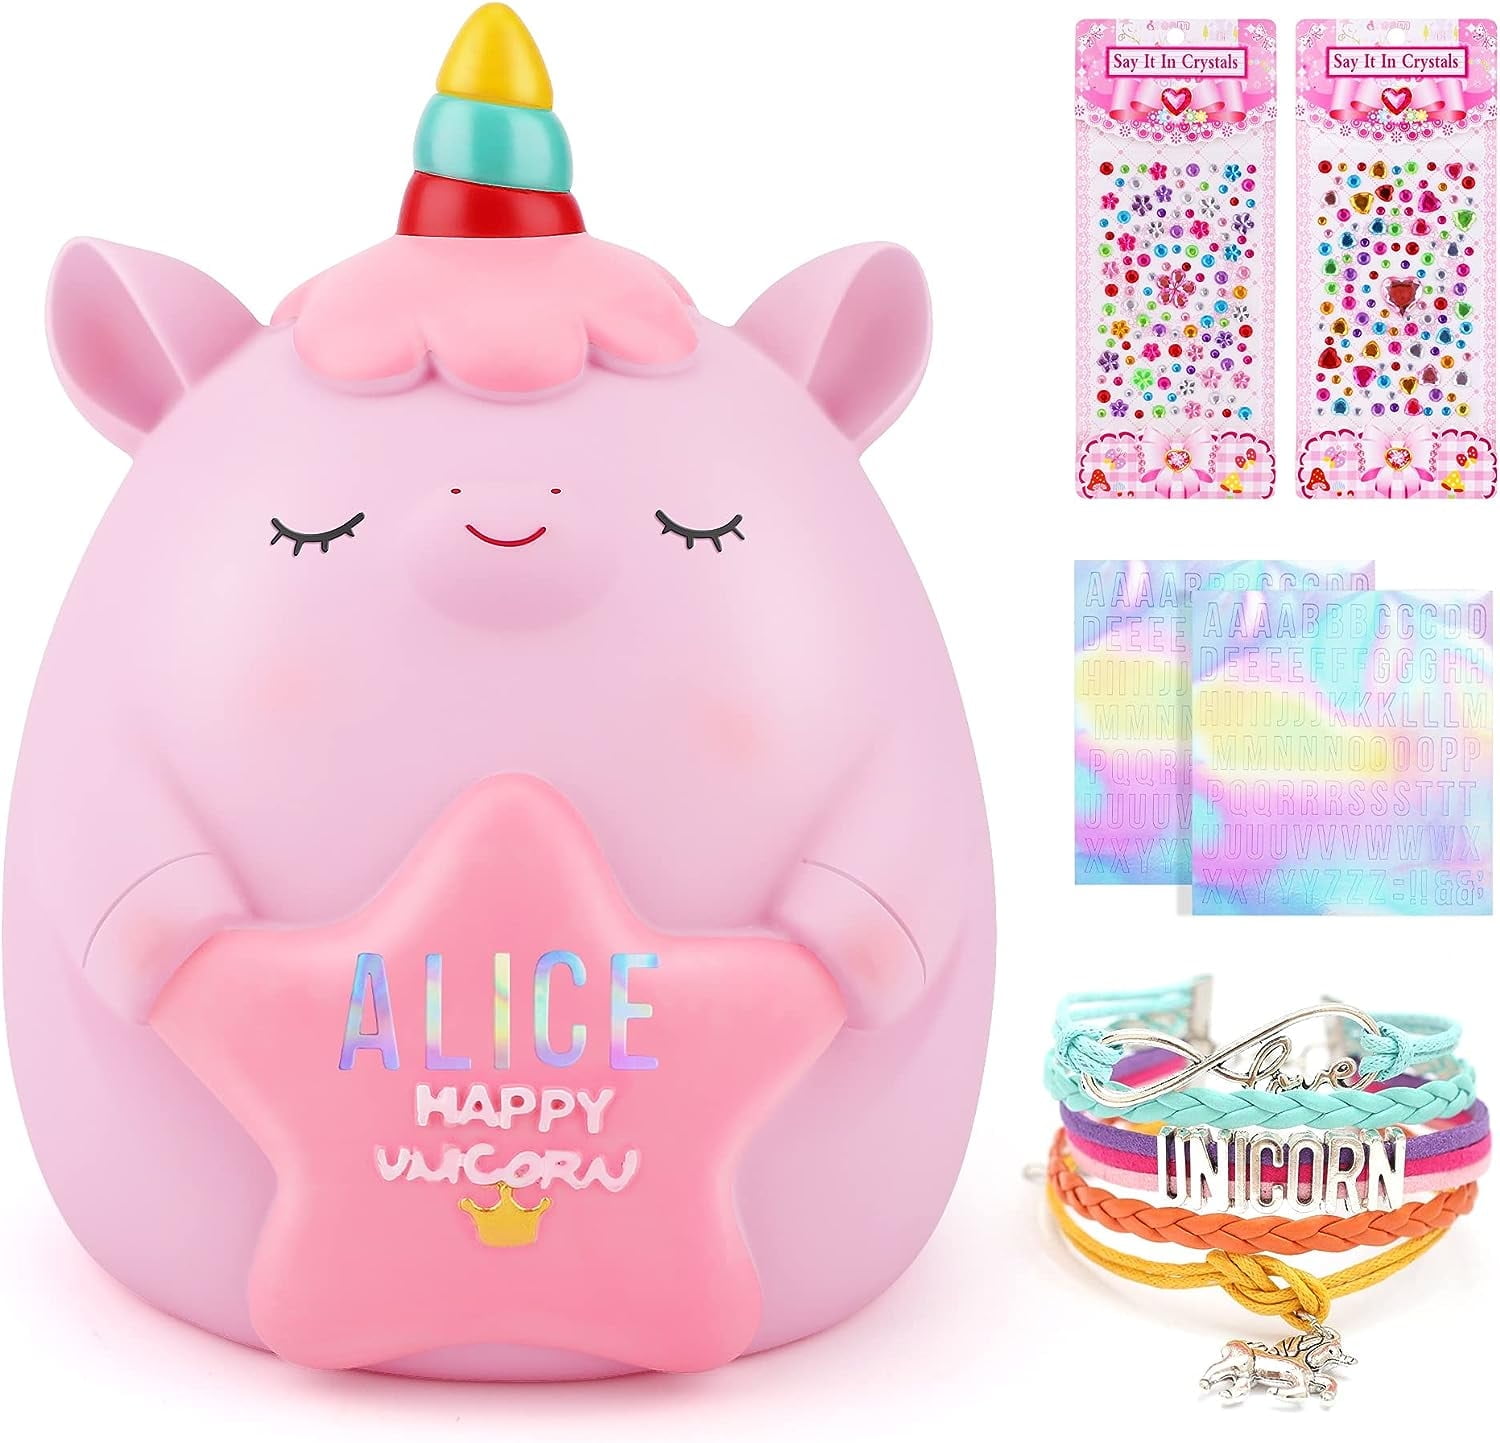 Kypeeka Clear Acrylic Piggy Bank for Adults Kids, Clear Money Saving Box  Must Break to Open, Unopenable Piggy Bank for Cash Coins - 4.72